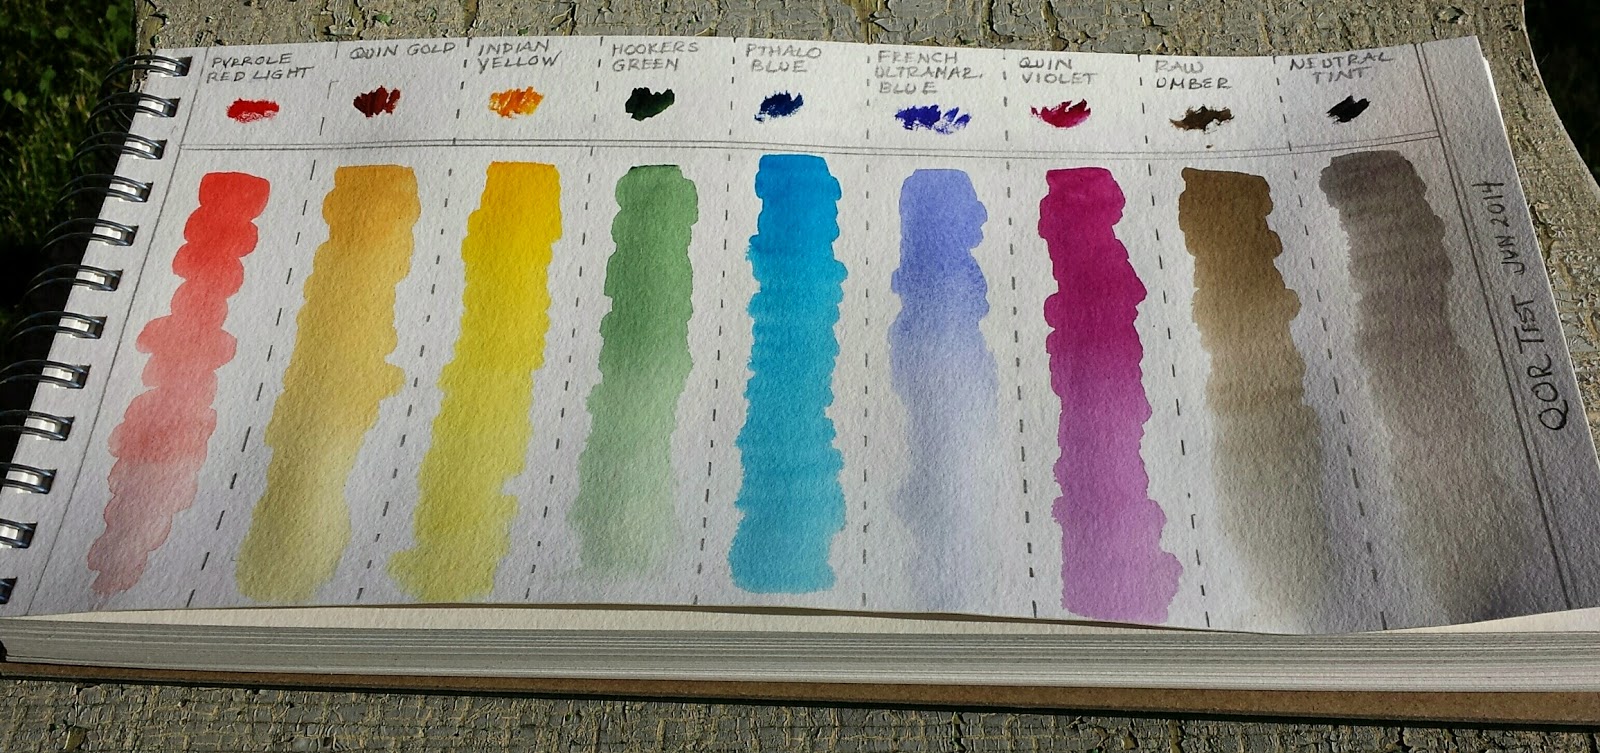 Dear Lissy: Mom Review: QoR Modern Watercolor Paints for Students